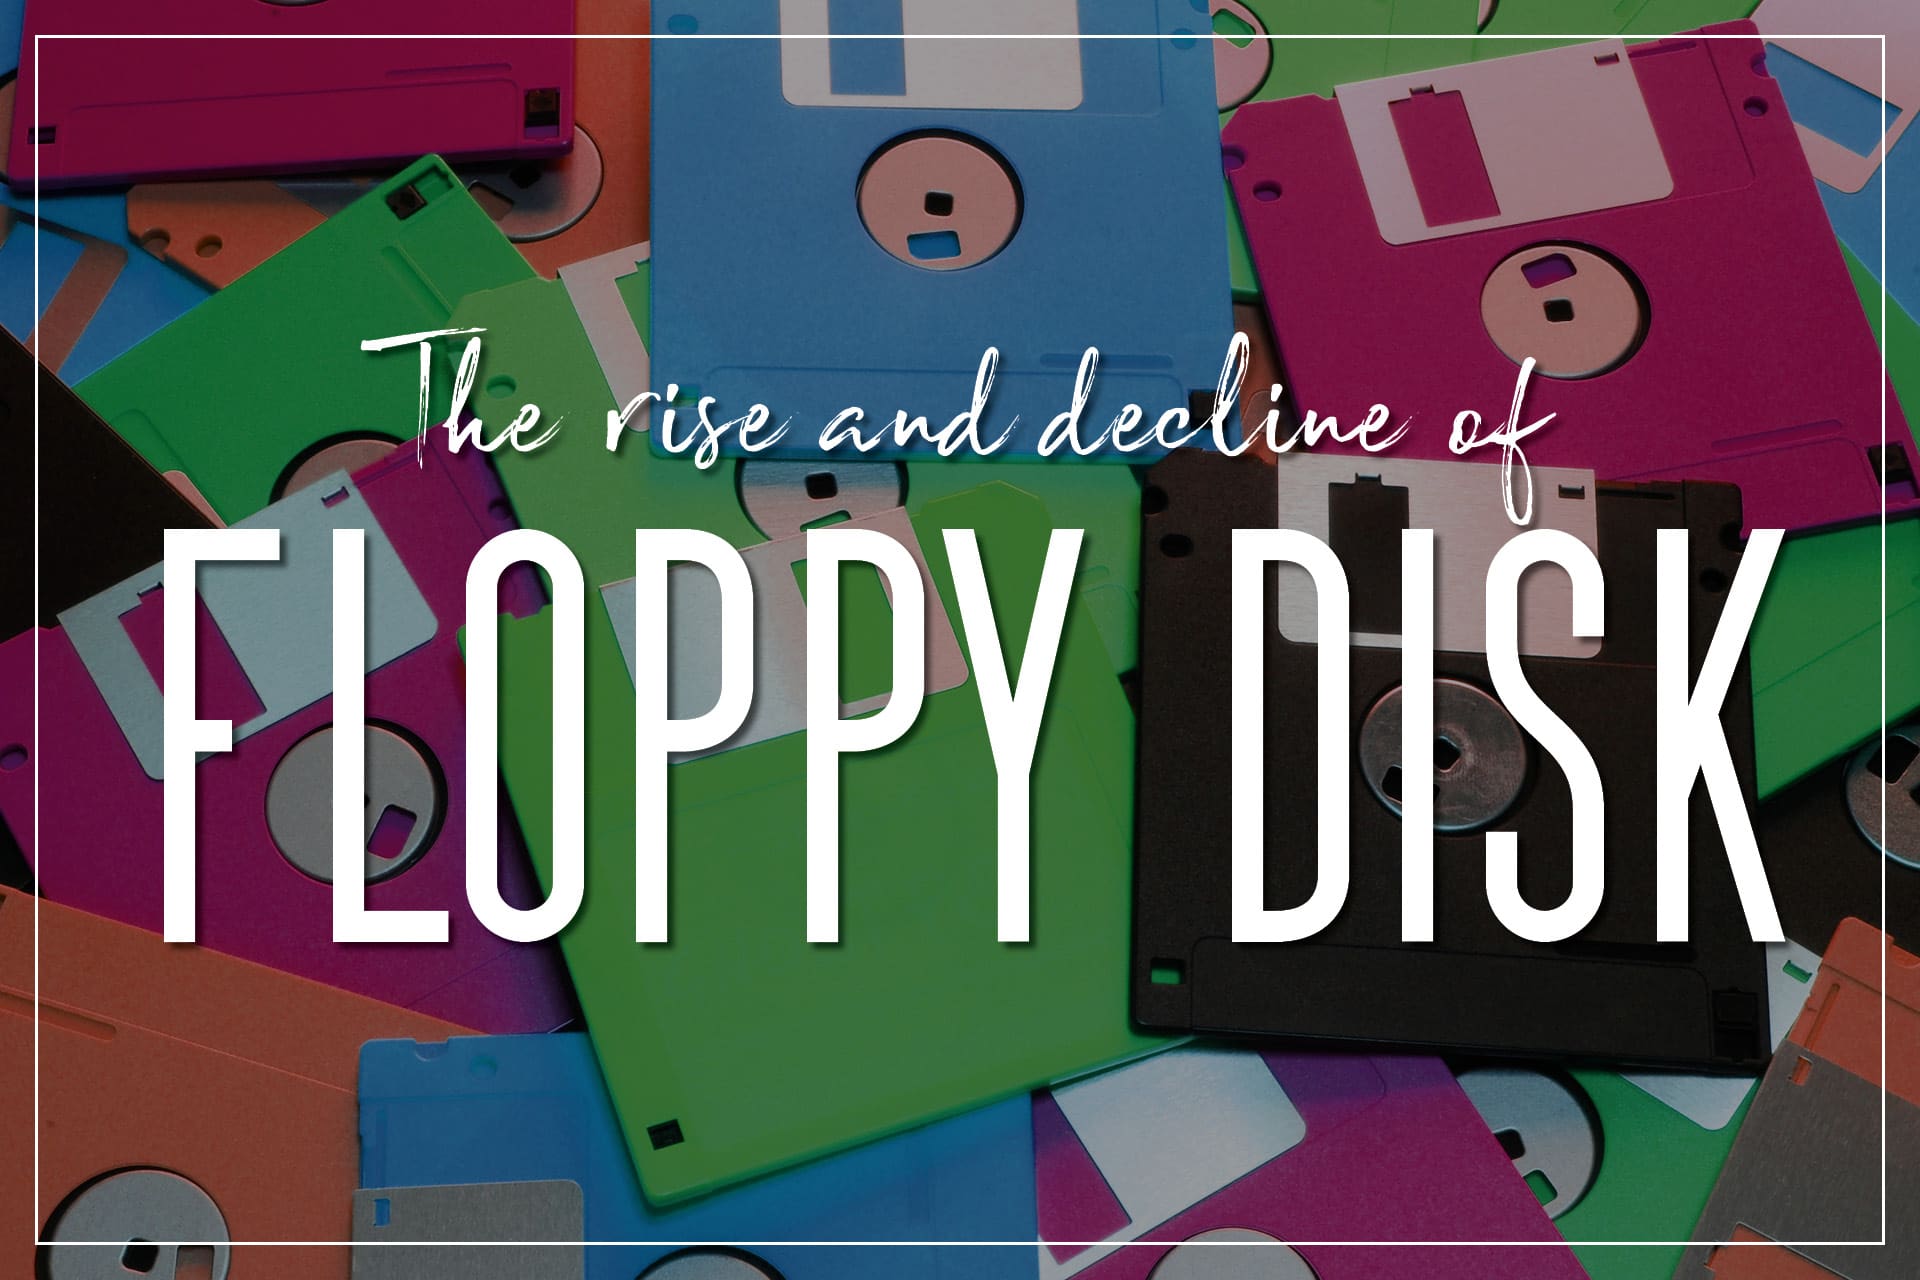 The Rise and Decline of the Floppy Disk